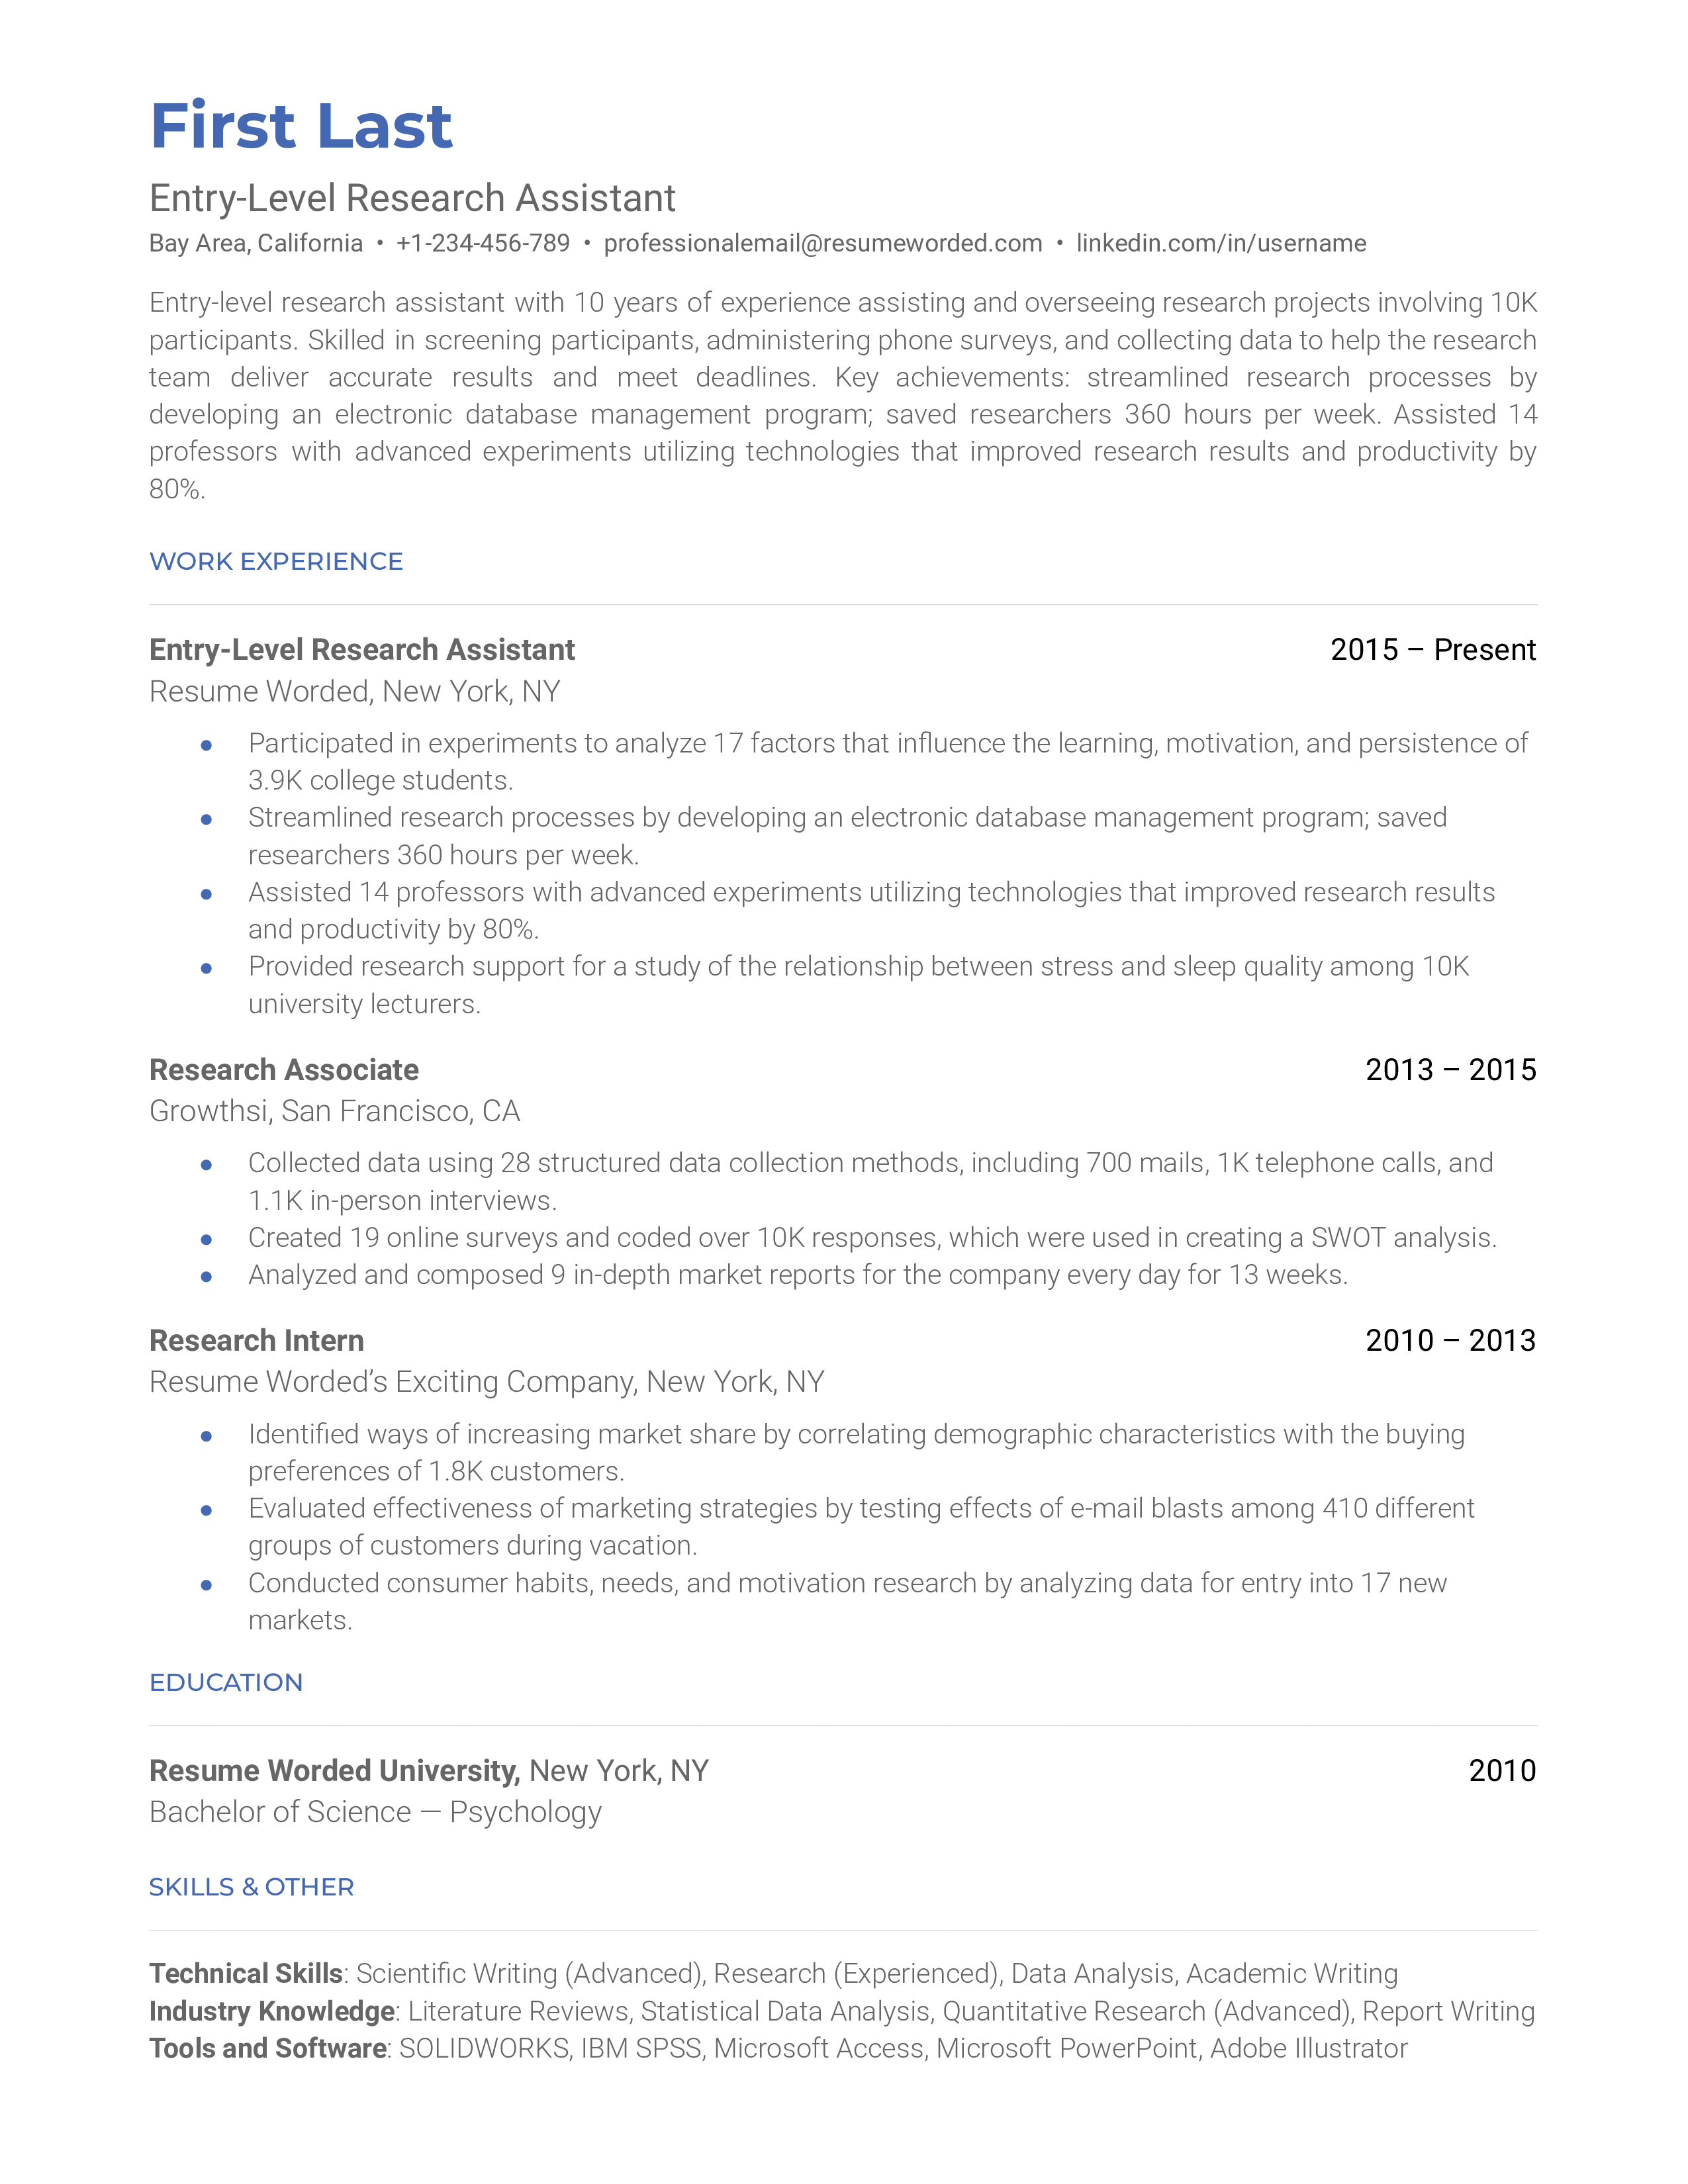 Graduate's CV for an entry-level research assistant role.